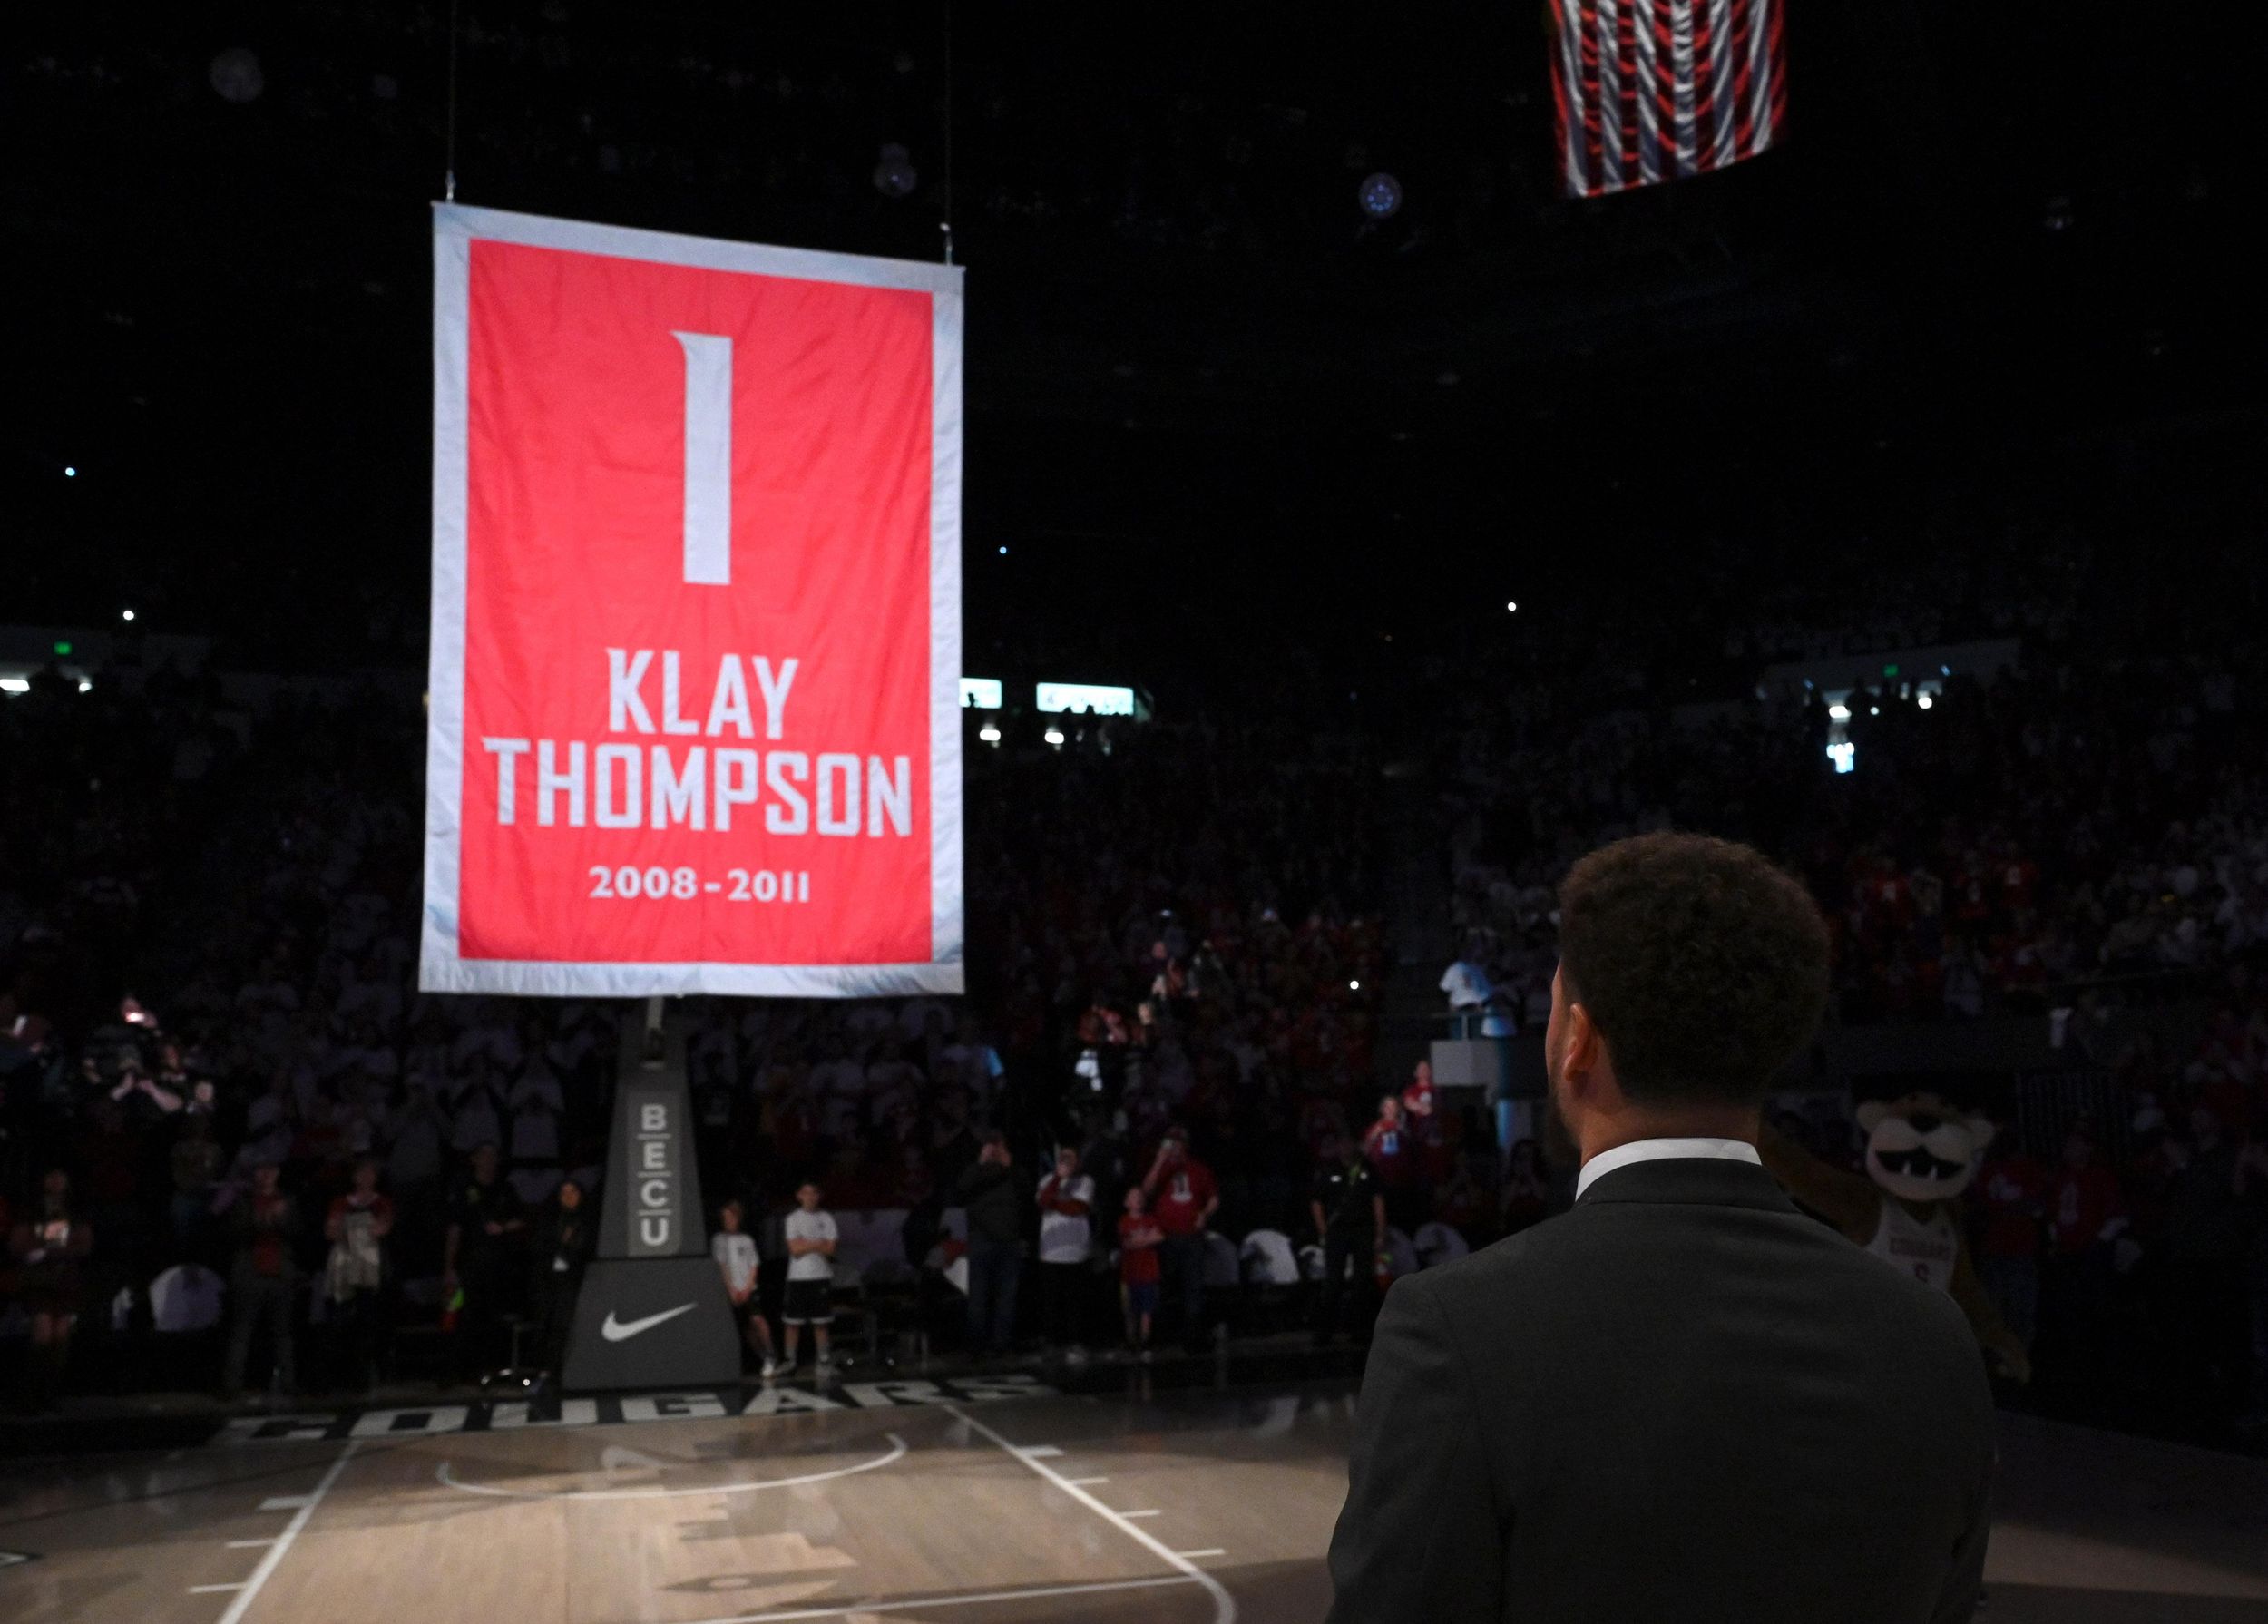 How to watch Klay Thompson's jersey retirement at WSU - CougCenter